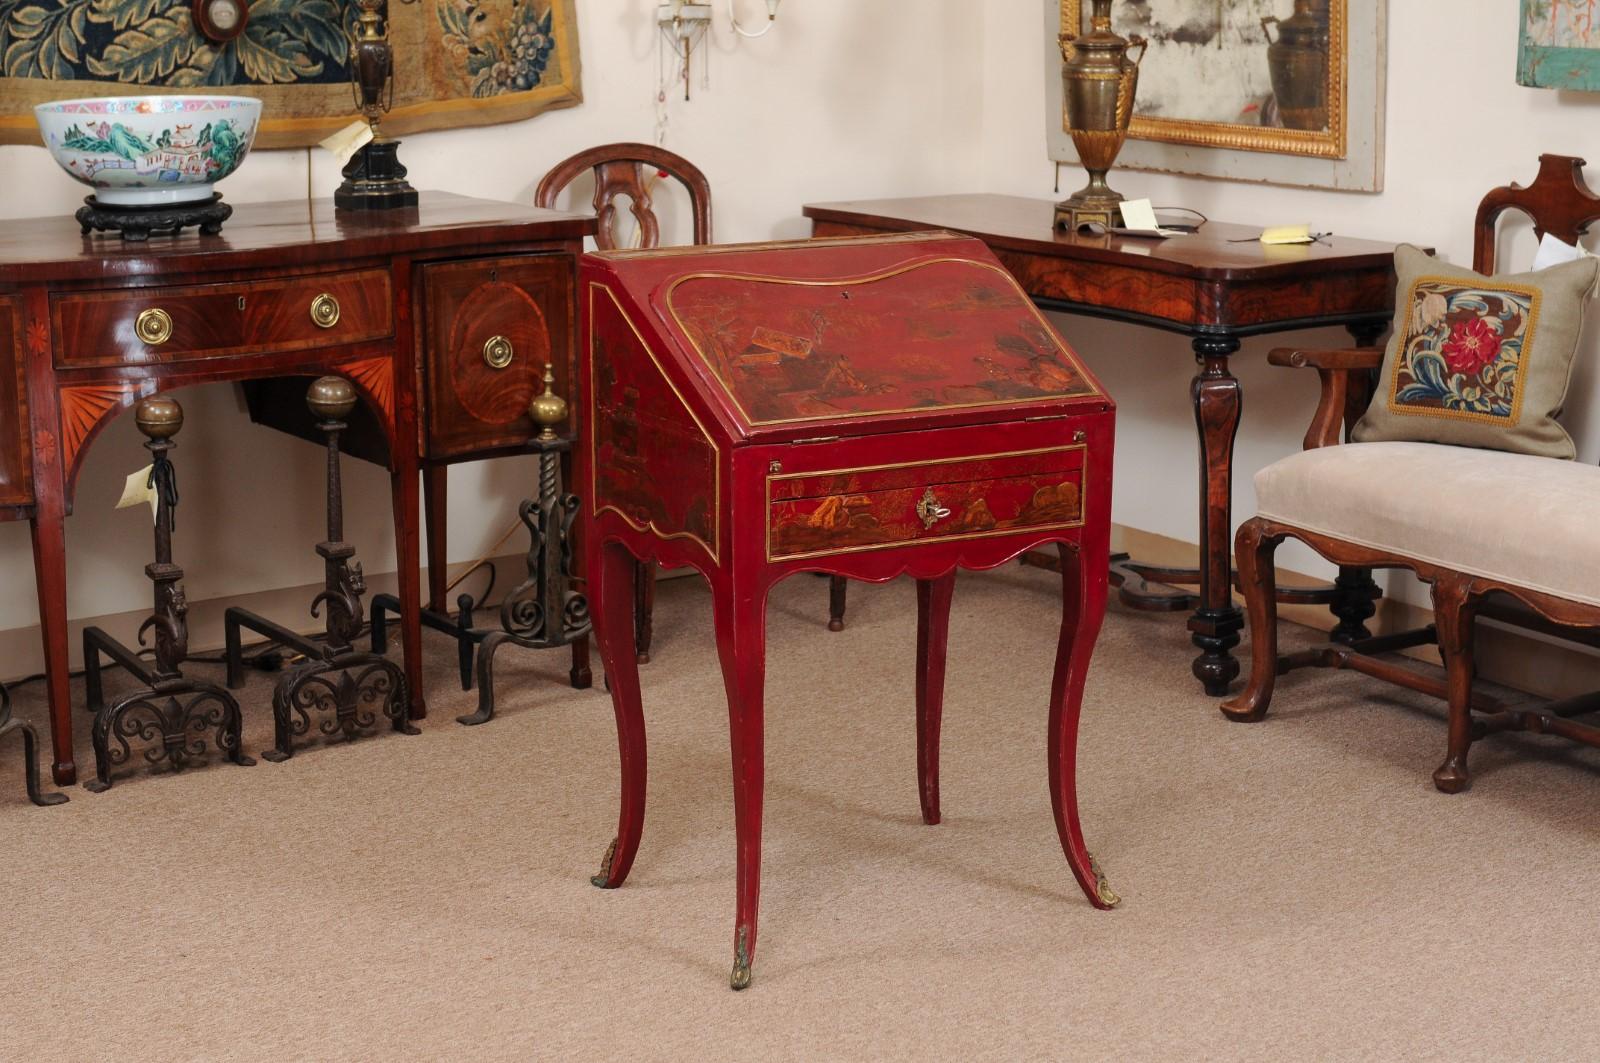 Louis XV style red Lacquered slant front bureau / desk with lower drawer & fitted interior, Chinoiserie decoration, Cabriole legs, and mounts on feet, 19th century, France.